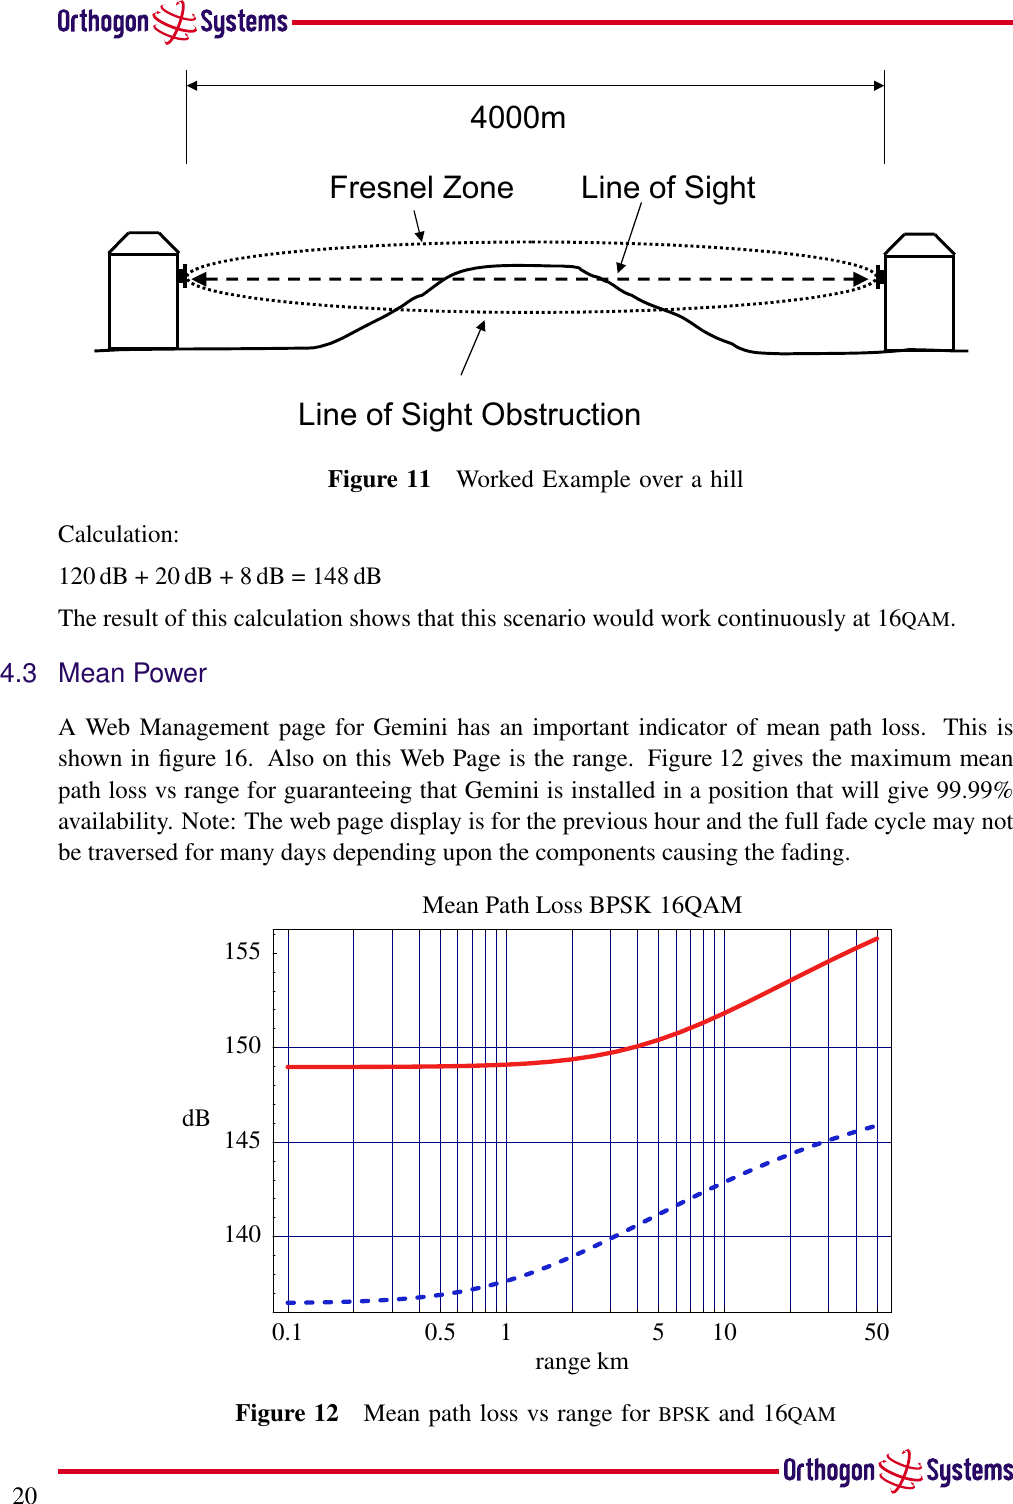 204000mFresnel ZoneLine of Sight ObstructionLine of SightFigure 11 Worked Example over a hillCalculation:120 dB + 20 dB + 8 dB = 148 dBThe result of this calculation shows that this scenario would work continuously at 16QAM.4.3 Mean PowerA Web Management page for Gemini has an important indicator of mean path loss. This isshown in ﬁgure 16. Also on this Web Page is the range. Figure 12 gives the maximum meanpath loss vs range for guaranteeing that Gemini is installed in a position that will give 99.99%availability. Note: The web page display is for the previous hour and the full fade cycle may notbe traversed for many days depending upon the components causing the fading.0.1 0.5 1 5 10 50range km140145150155dBMean Path Loss BPSK16QAMFigure 12 Mean path loss vs range for BPSK and 16QAM